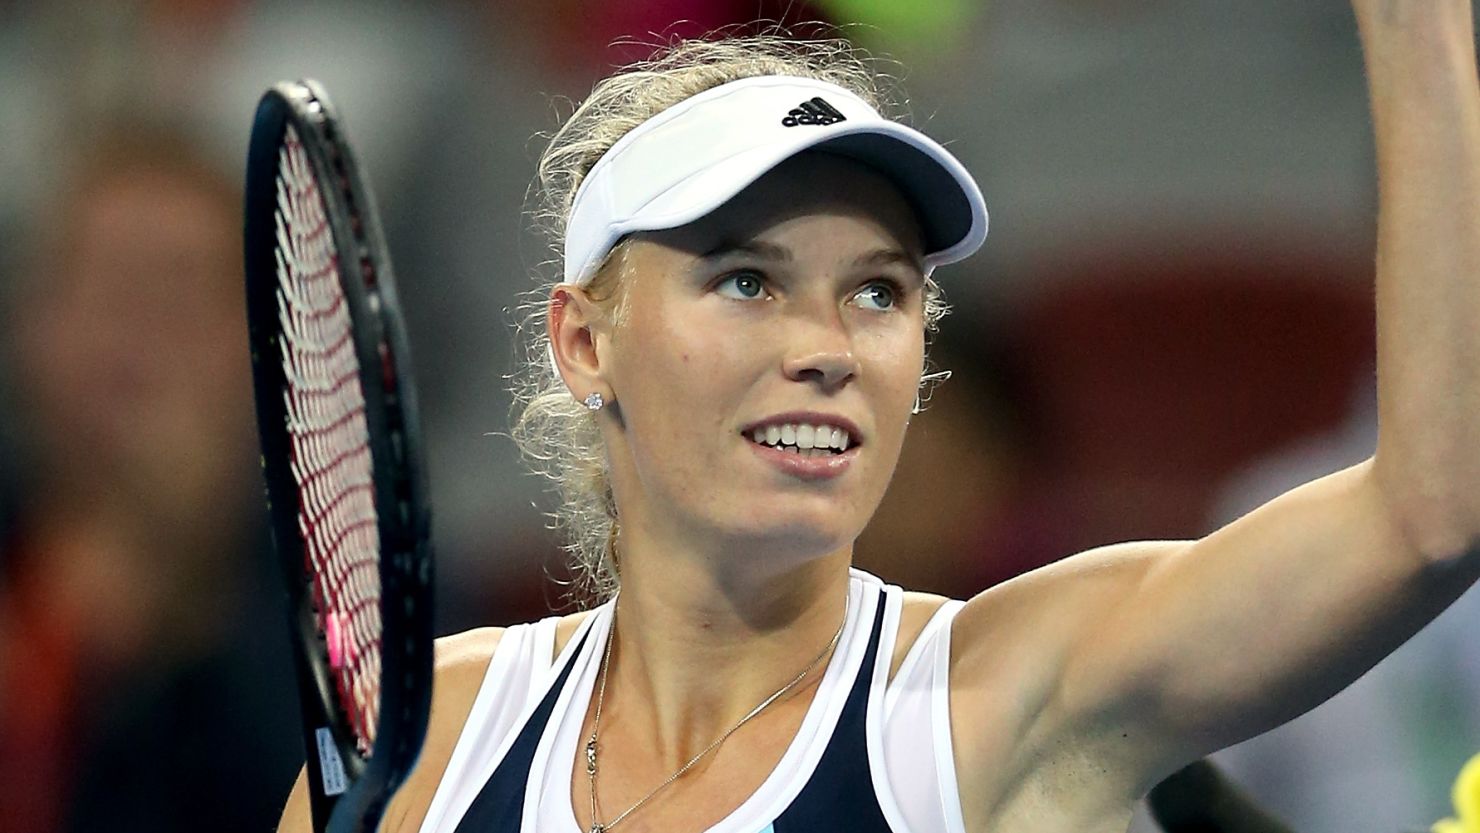 Caroline Wozniacki won her first title since 2012 at the Luxembourg Open.